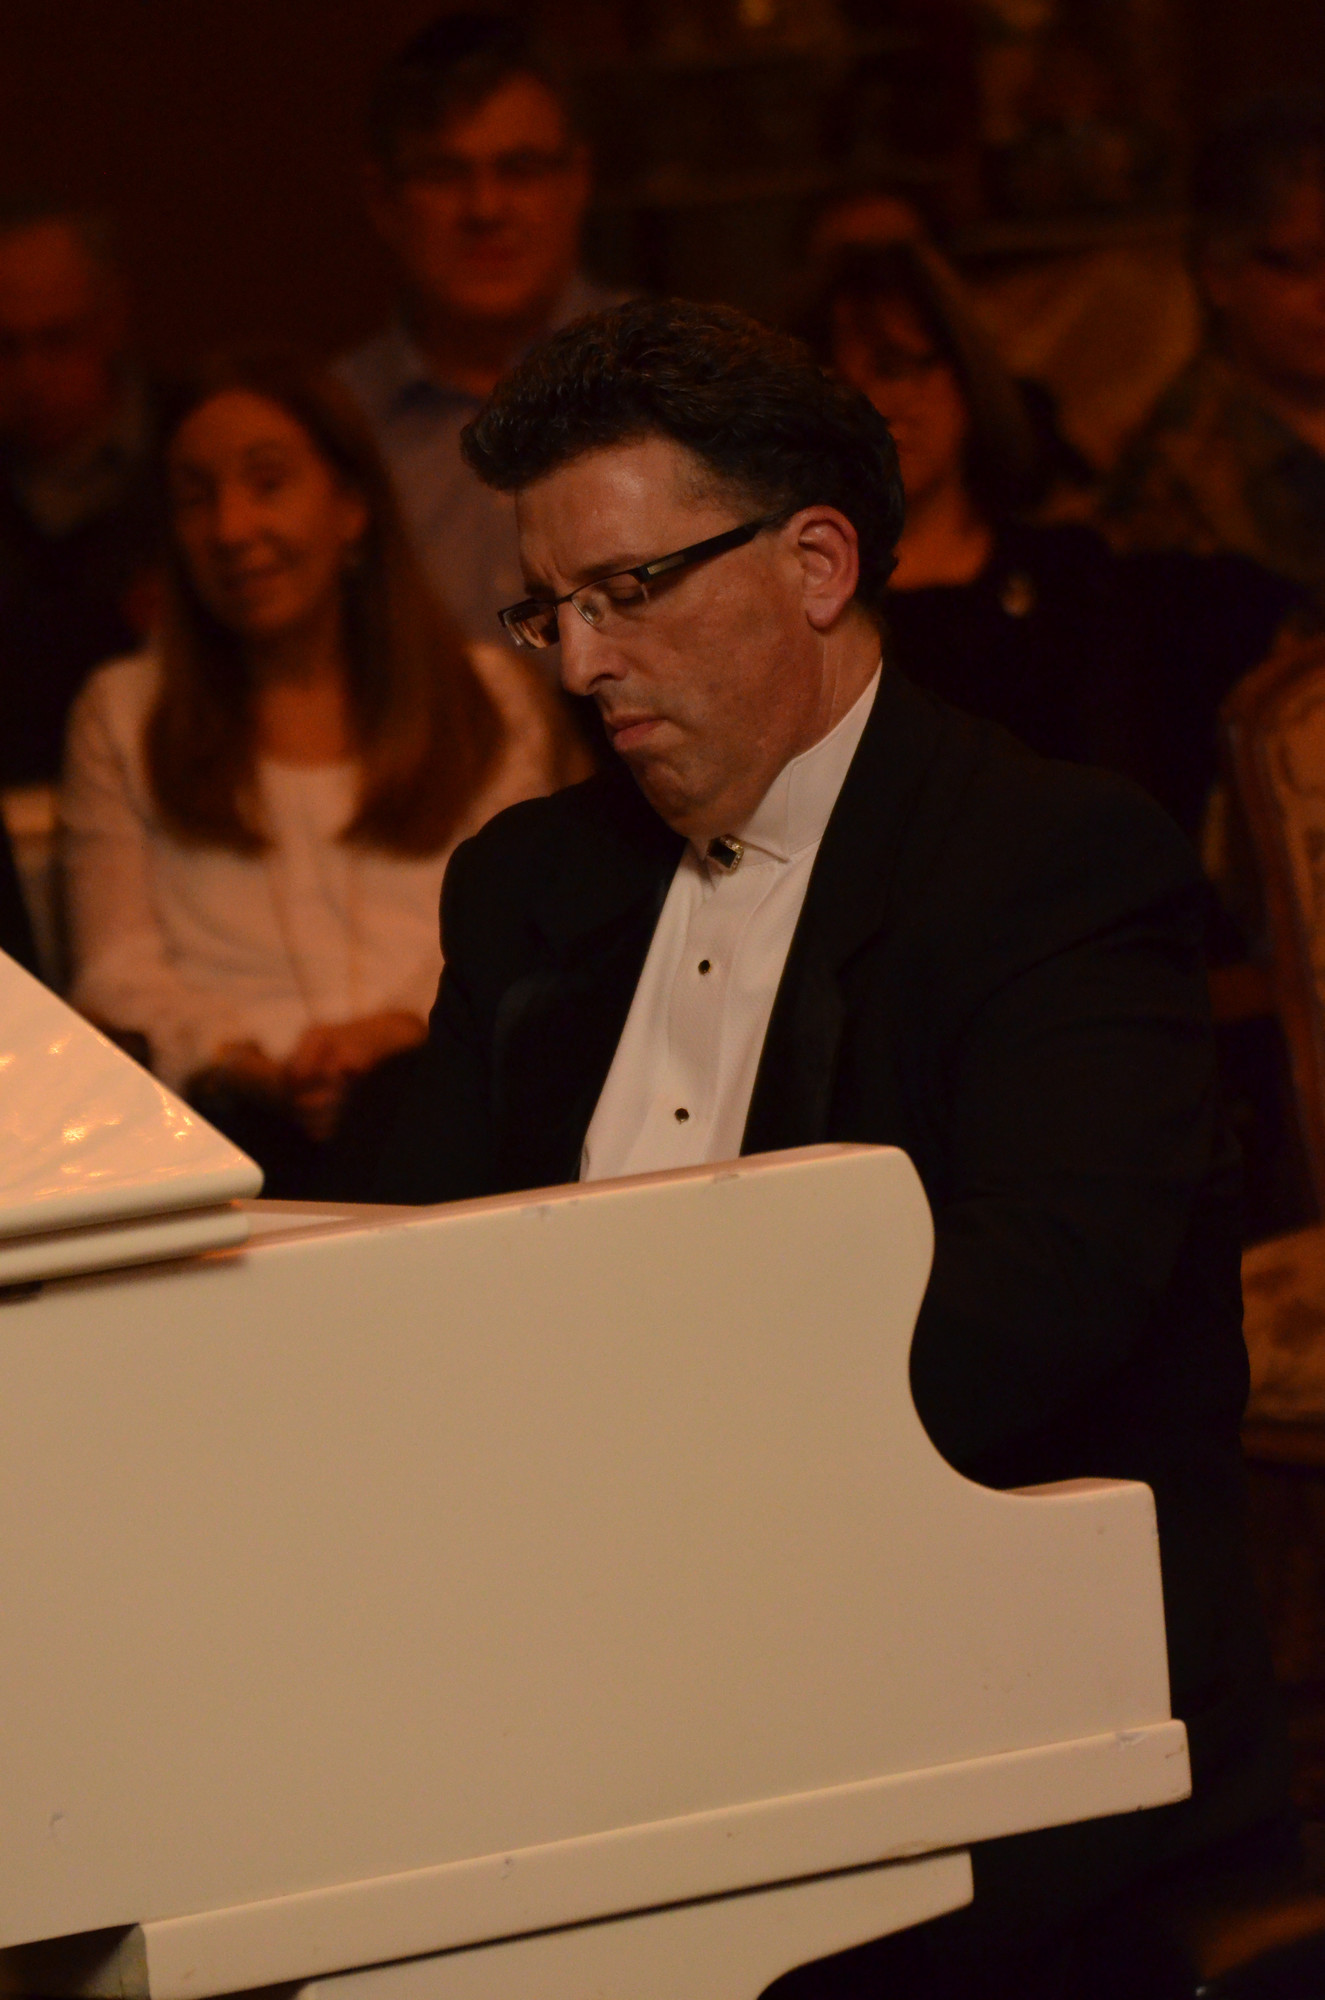 Biegel, a renowned pianist, recording artist, composer and arranger, performed at the East Meadow Jewish Center.